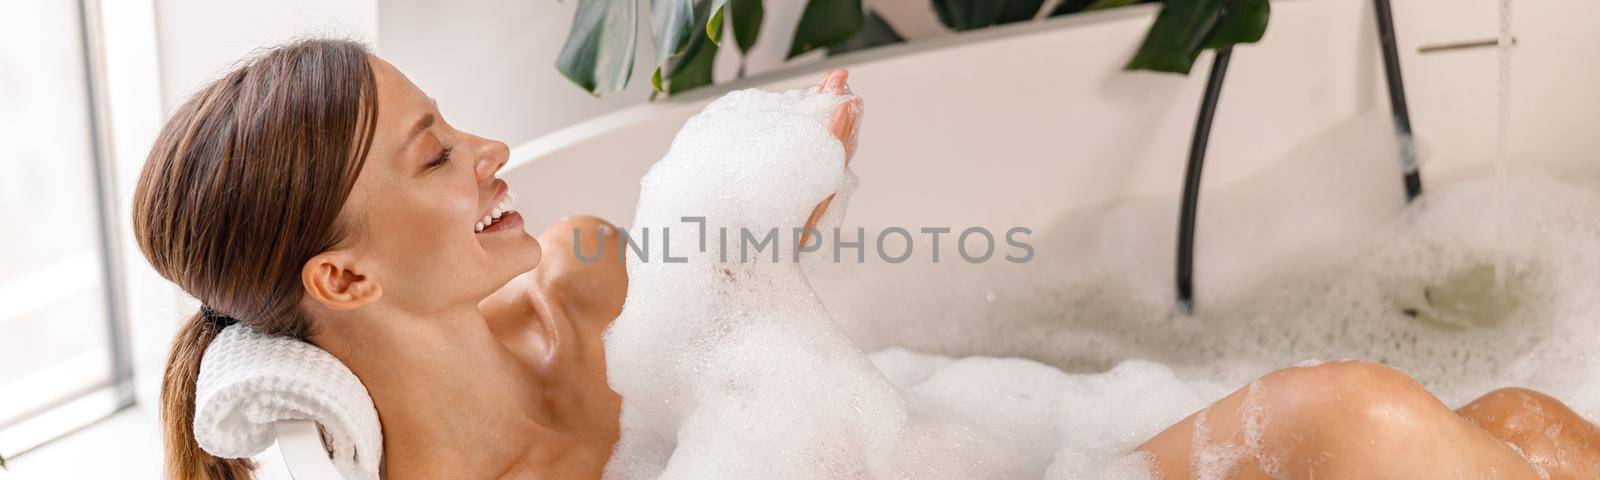 Bathing young woman relaxing in bath, smiling and playing with bubble foam. Body care, wellness concept